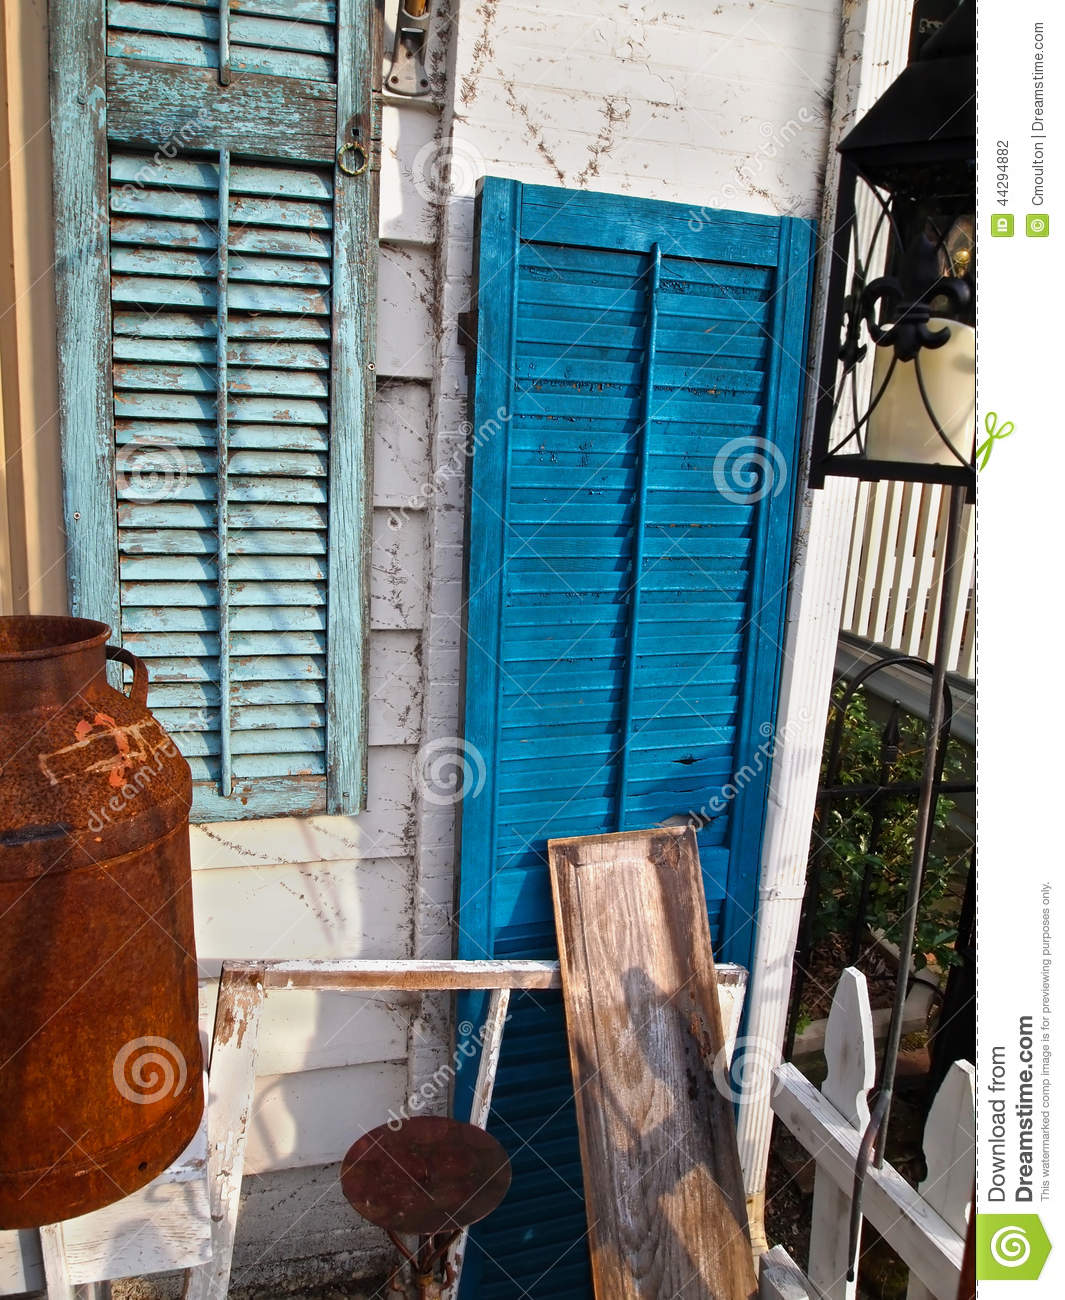 Shutters With Peeling Paint On An Aging Porch Full Of Vintage Items